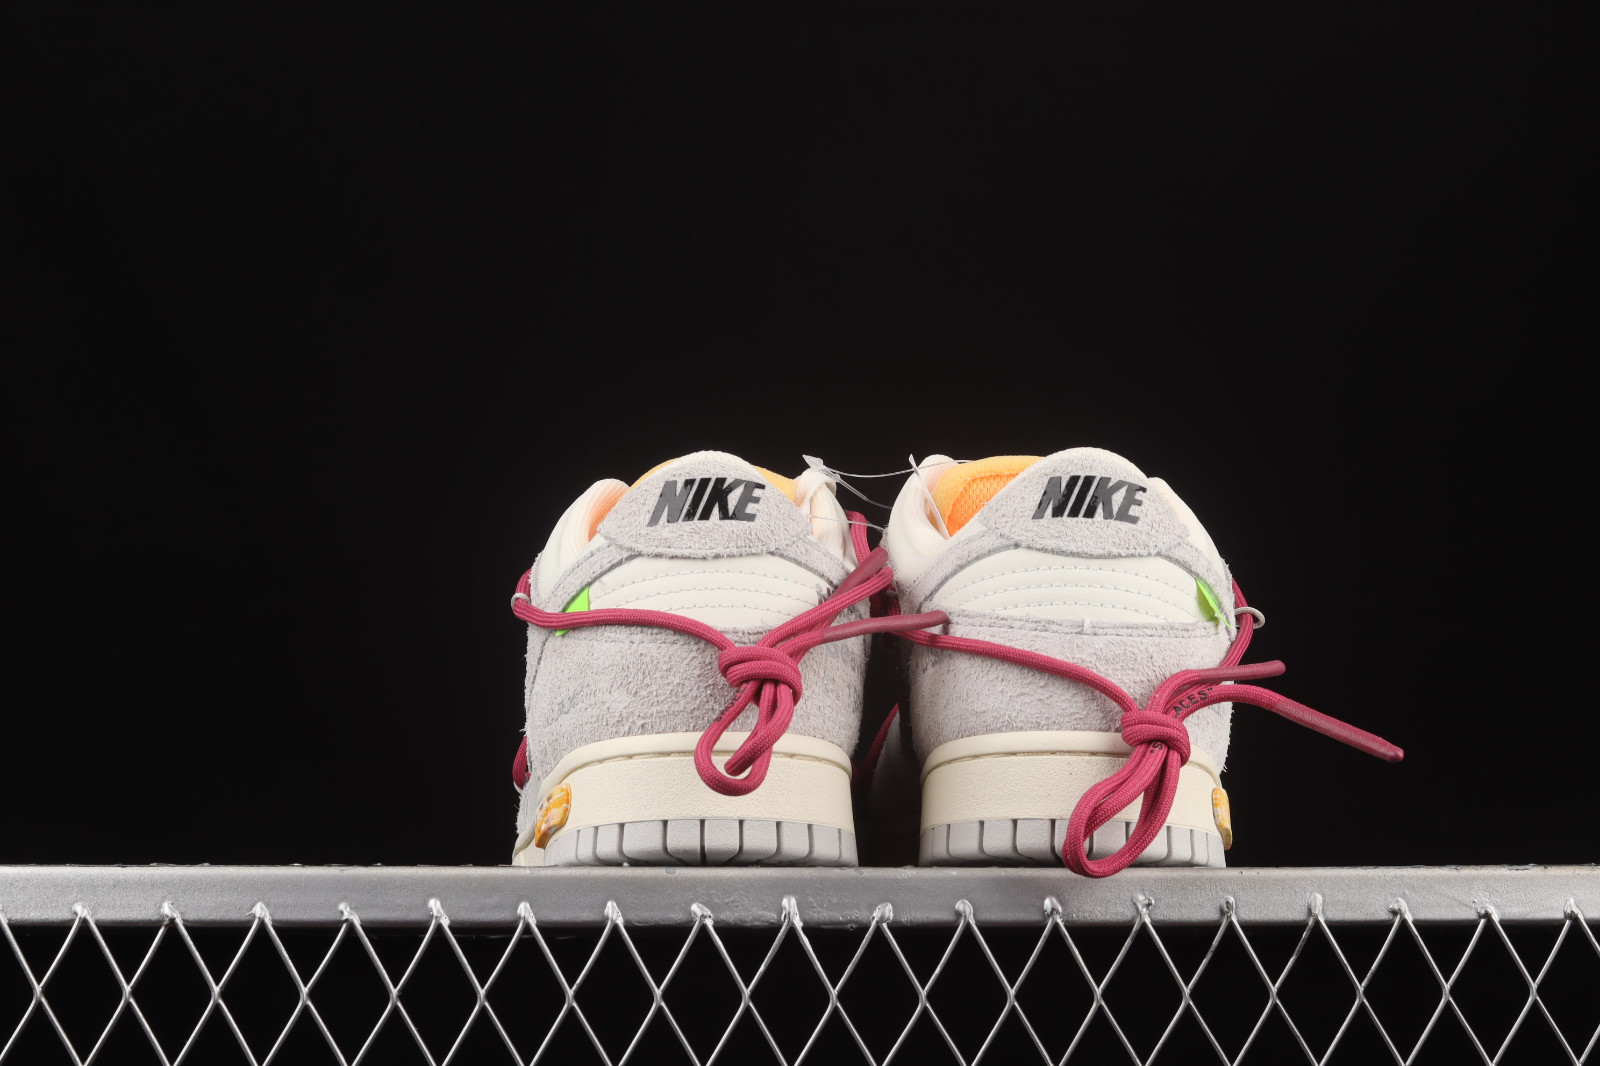 nike air max2 light neon size 9 0 to 13 0 honoring - Off - White x Nike SB  Dunk Low Lot 35 of 50 Neutral Grey Rose Red DJ0950 - BioenergylistsShops -  NIke Dunk SB Low - 114